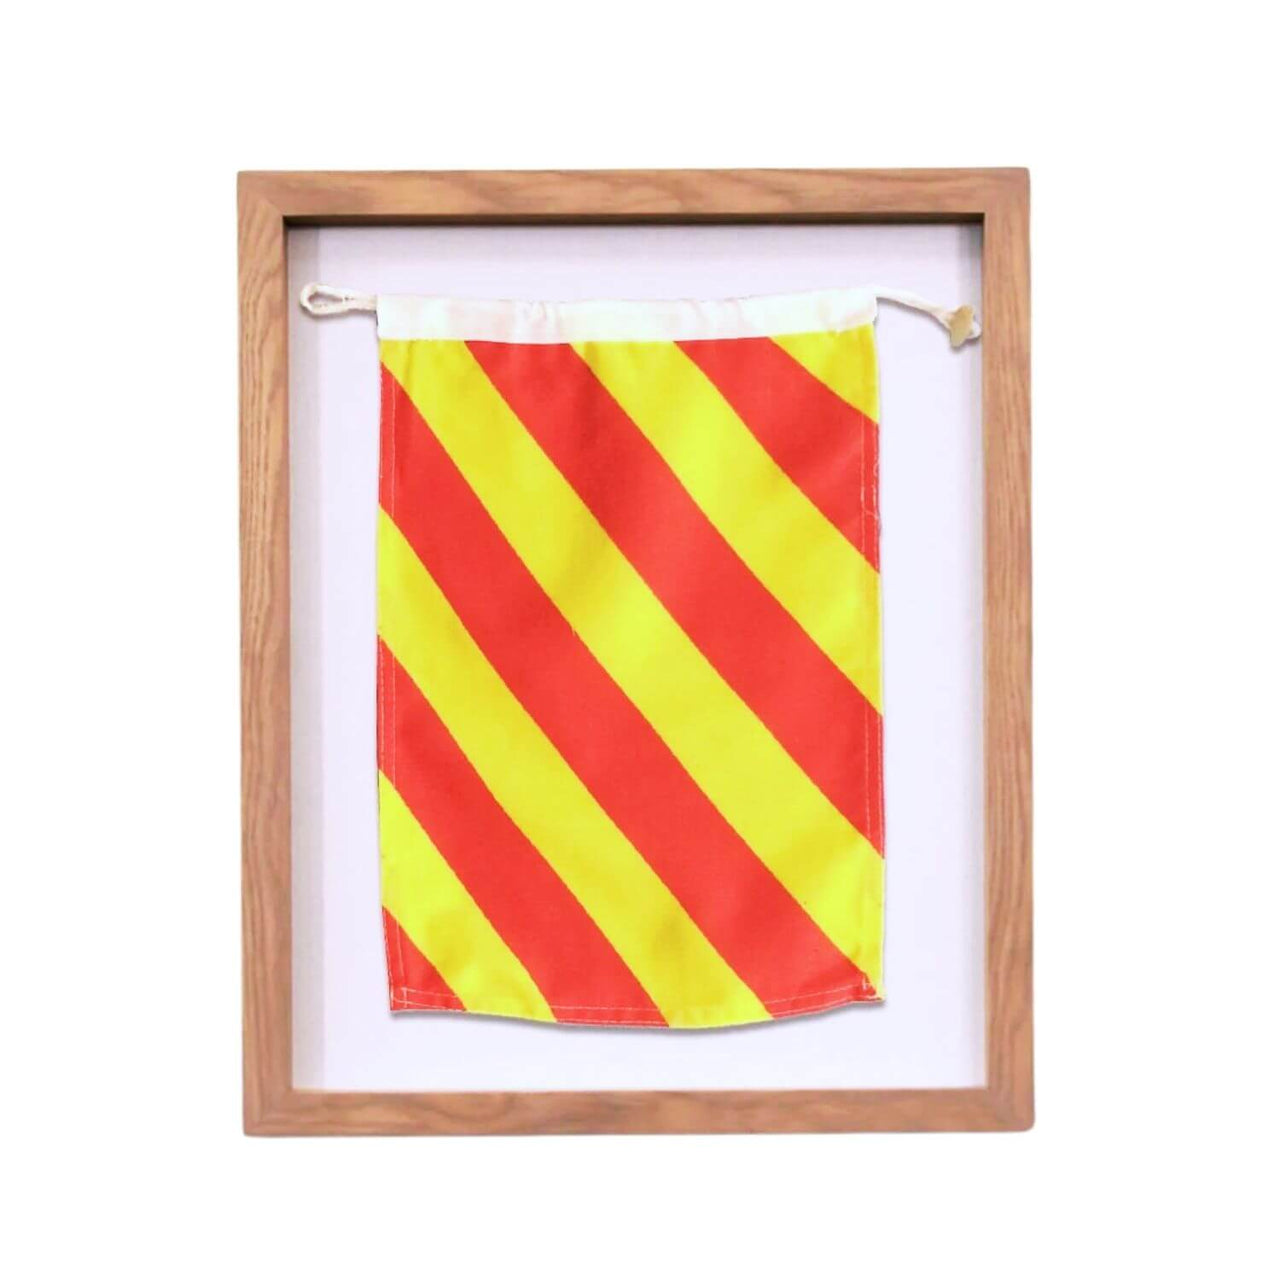 Framed Nautical Flags, A-Z New England Trading Co Decor Y